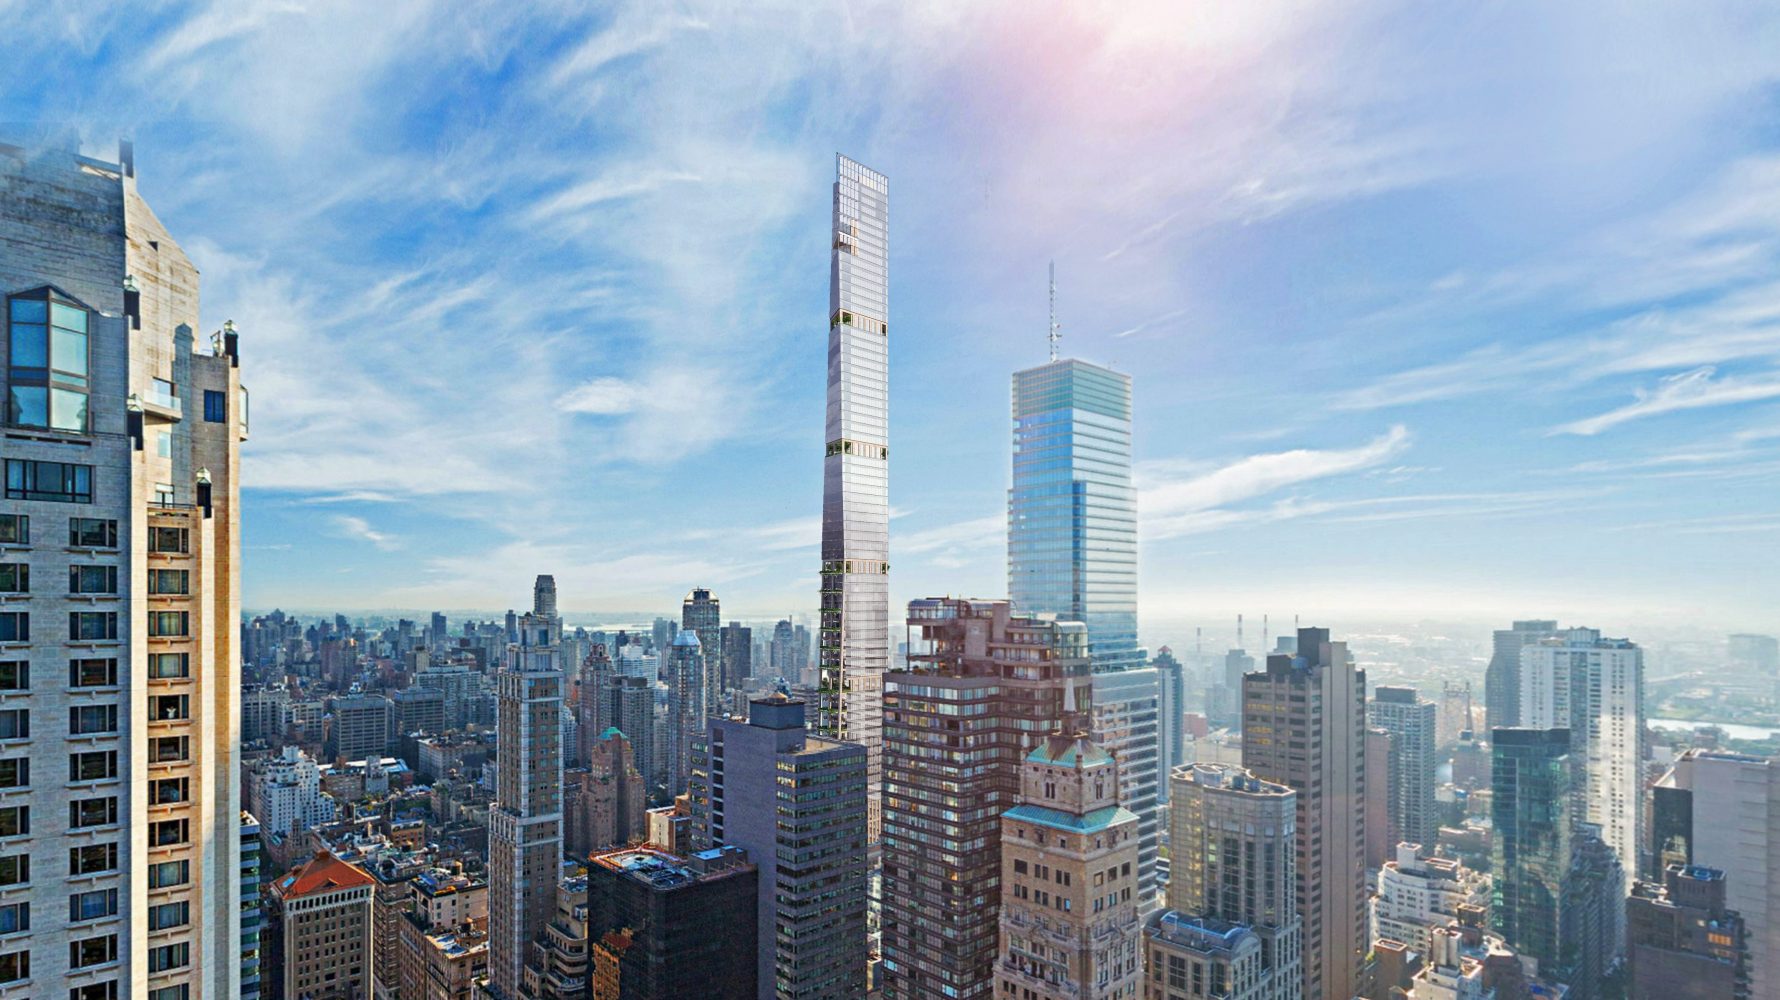 Archilier Architects Design Empire State Building-Sized Tower for Former Subway Inn Site